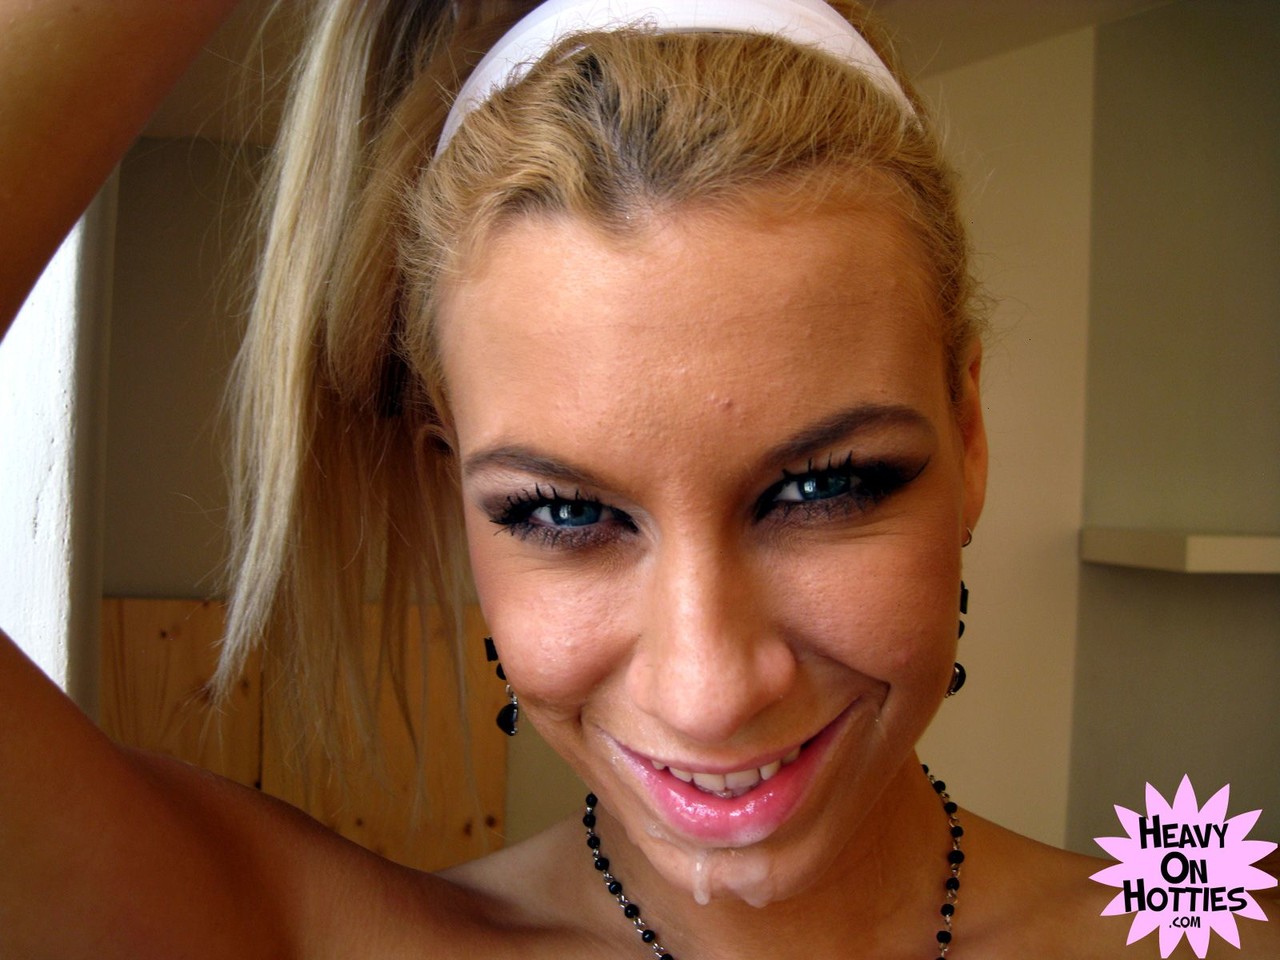 Blonde Angelina Love poses with jizz on her face after giving a BJ in POV ポルノ写真 #427391666 | Heavy On Hotties Pics, Angelina Love, POV, モバイルポルノ